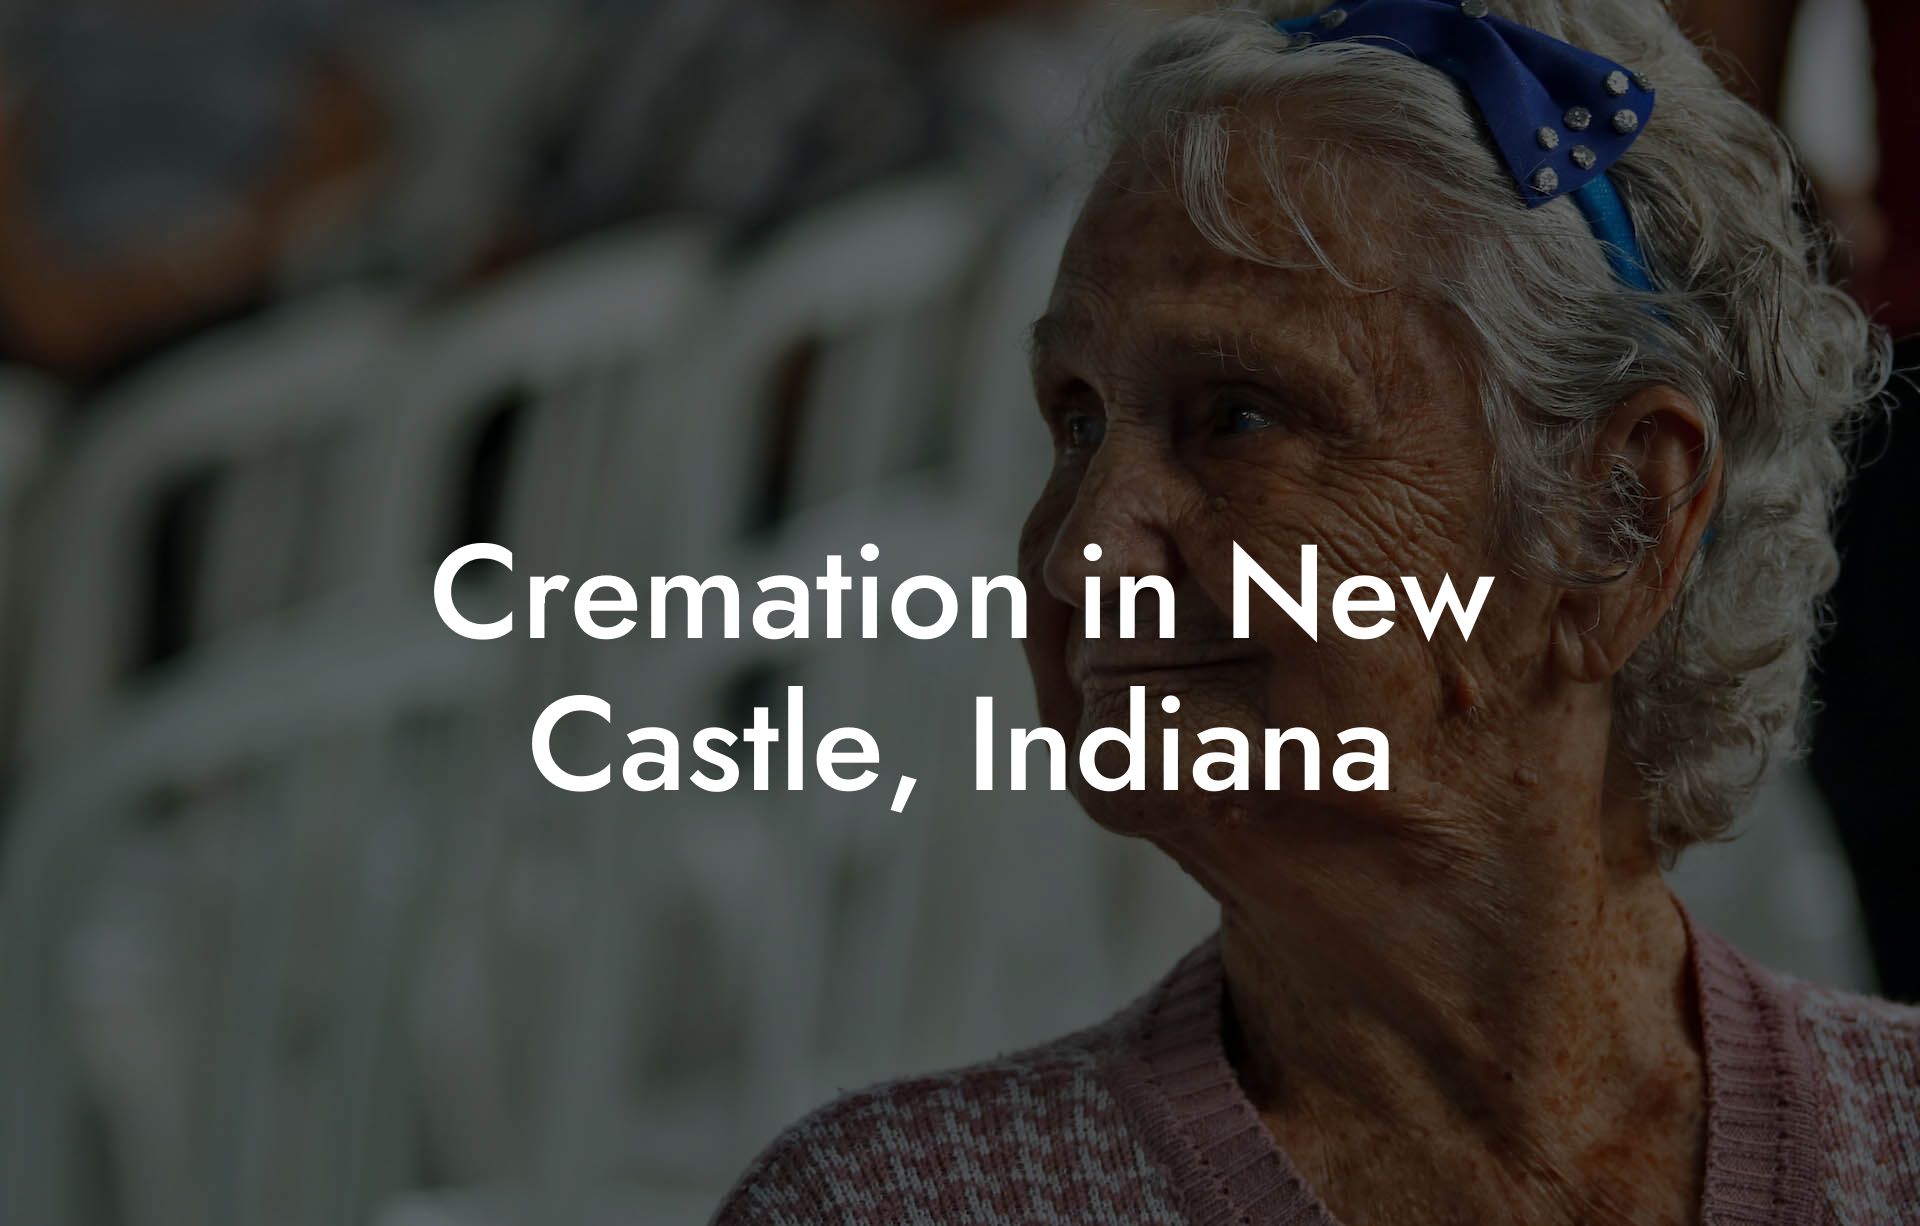 Cremation in New Castle, Indiana